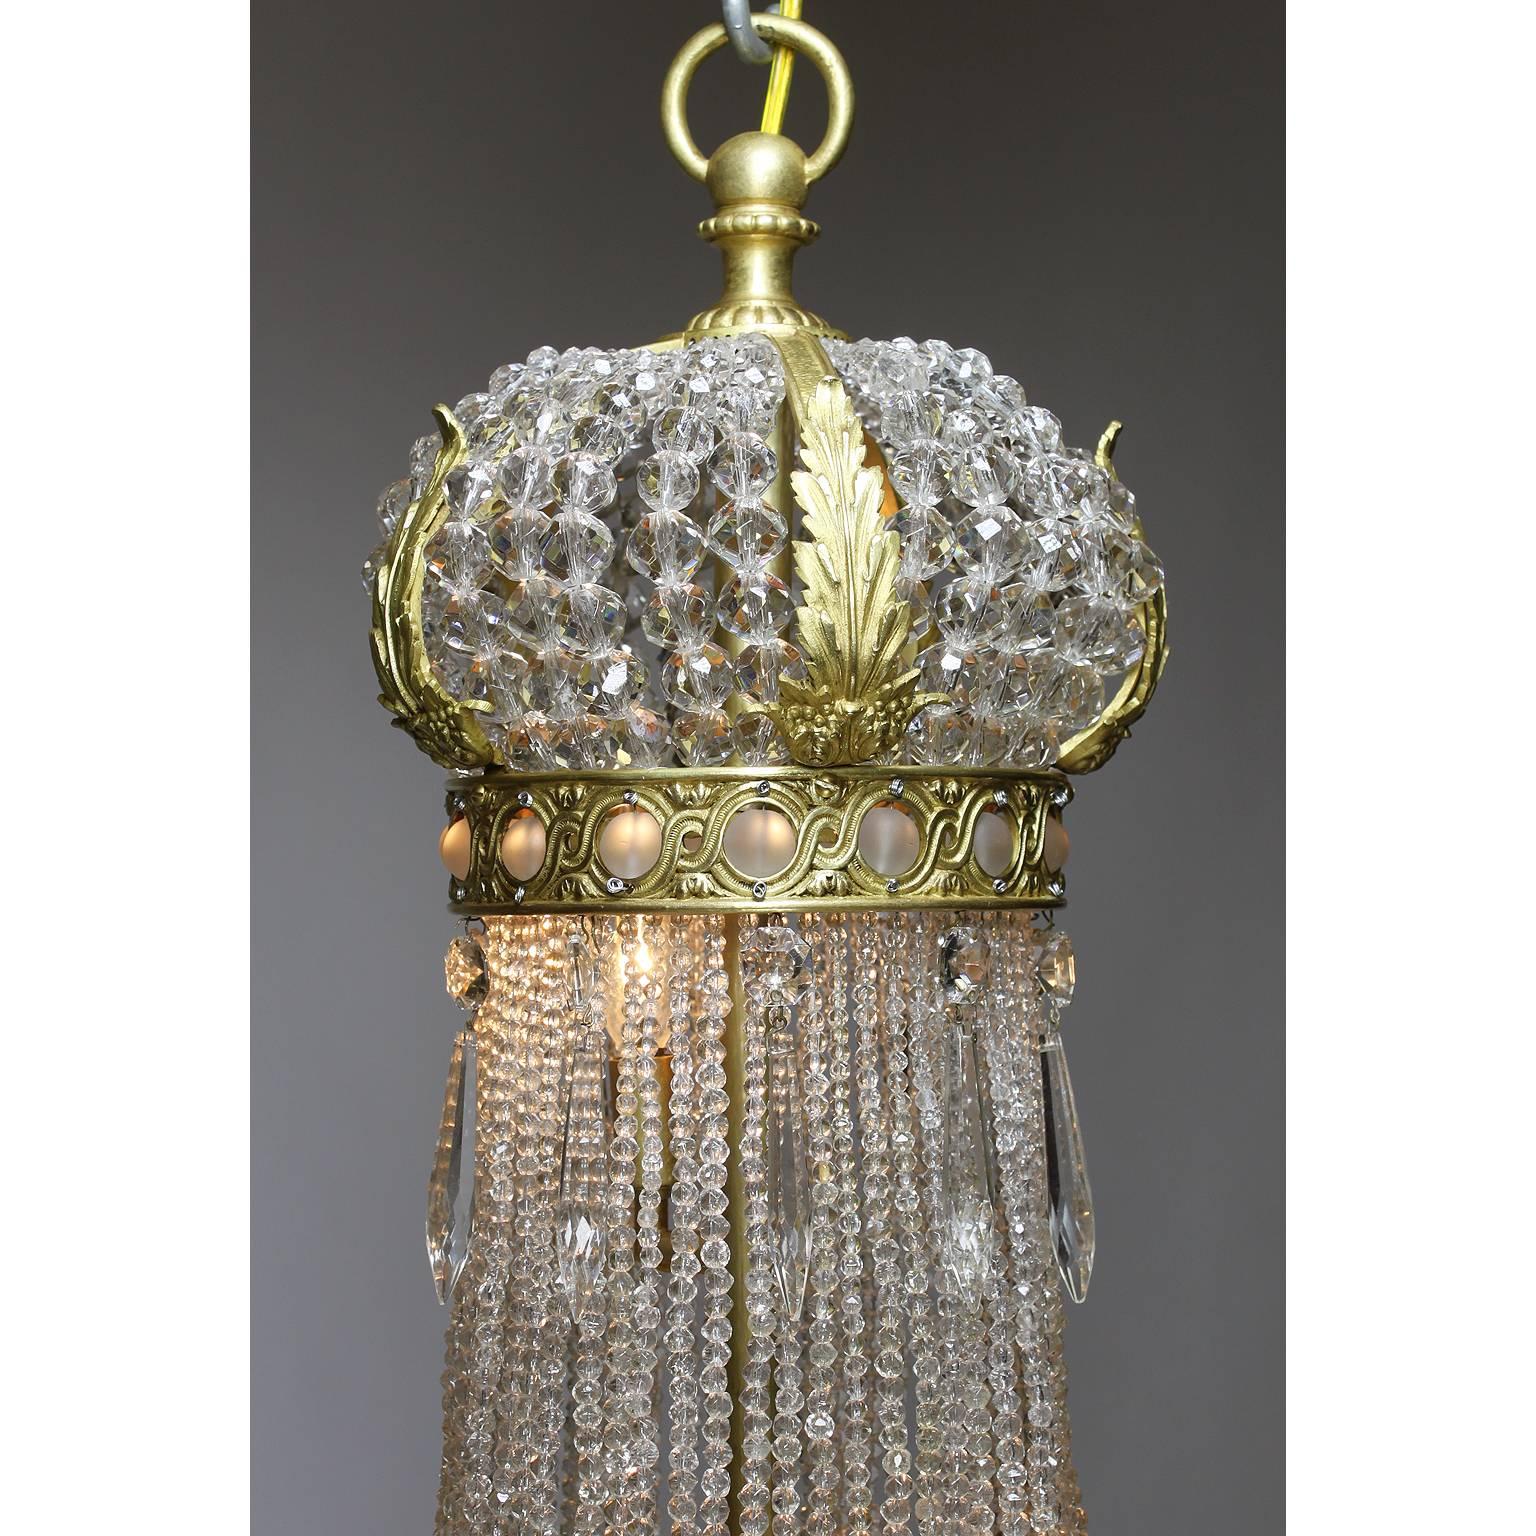 French 19th-20th Century Louis XVI Style Gilt-Bronze and Beaded Glass Chandelier 3